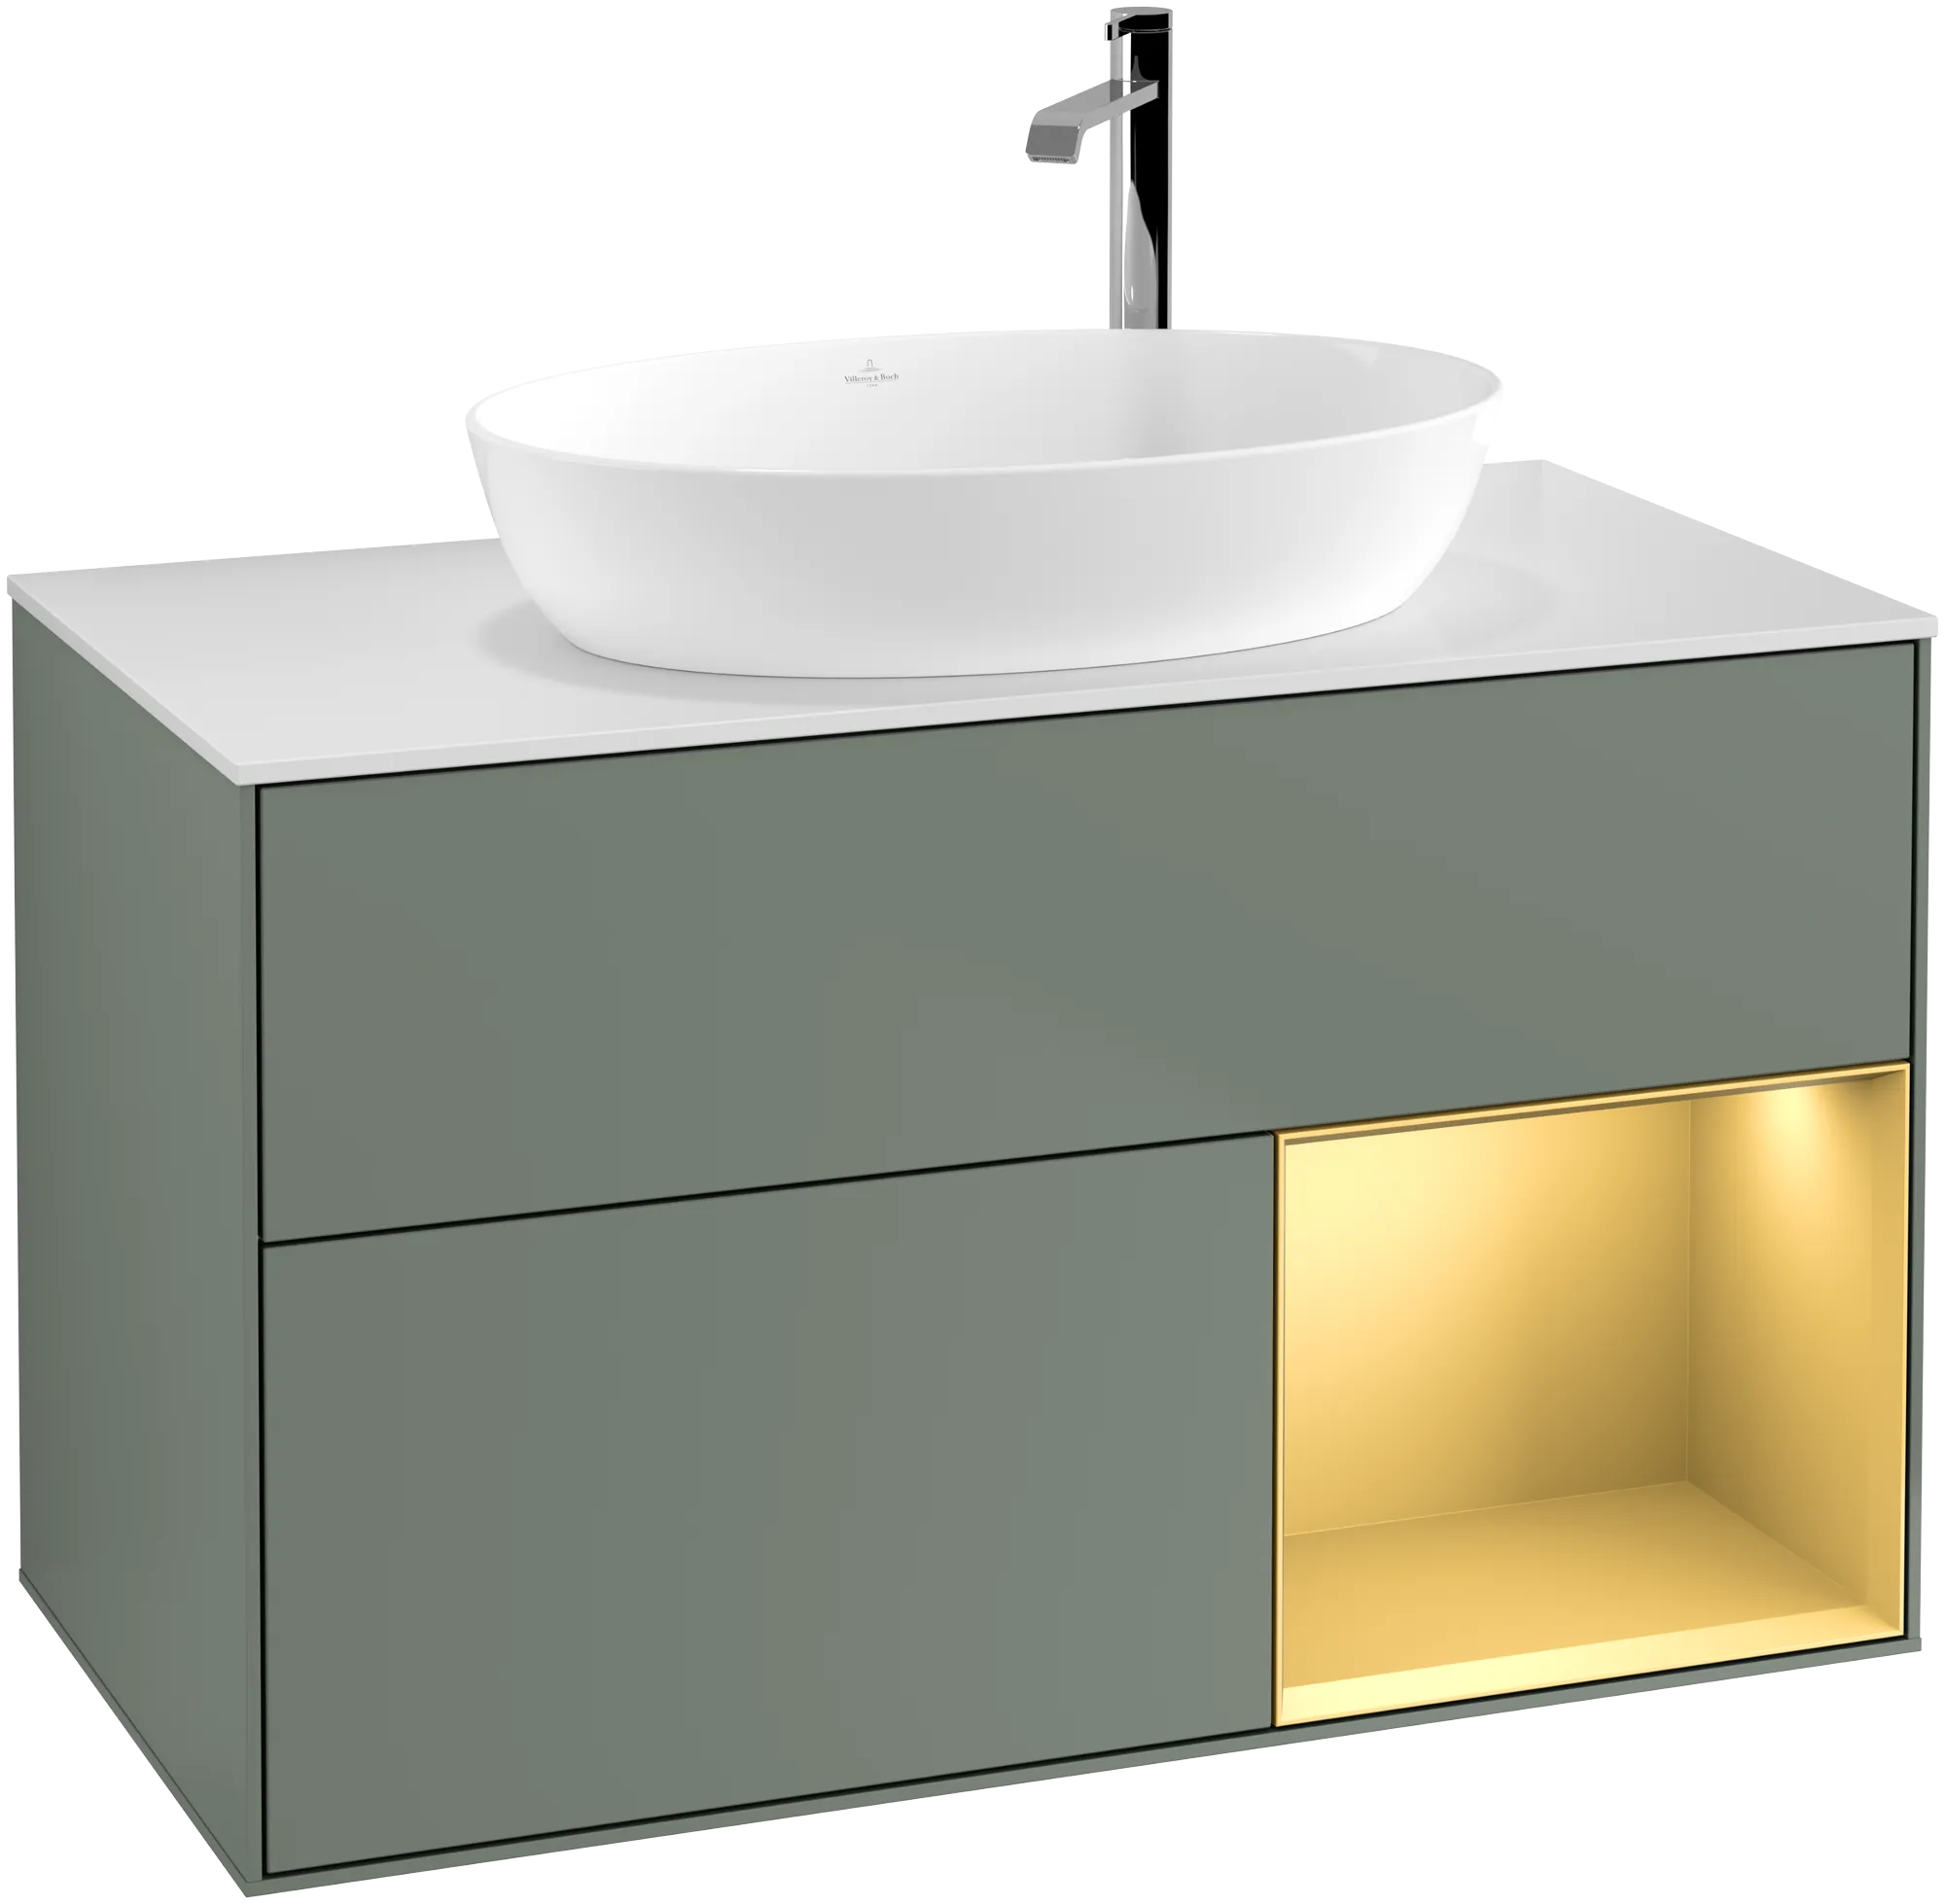 Picture of VILLEROY BOCH Finion Vanity unit, with lighting, 2 pull-out compartments, 1000 x 603 x 501 mm, Olive Matt Lacquer / Gold Matt Lacquer / Glass White Matt #G901HFGM